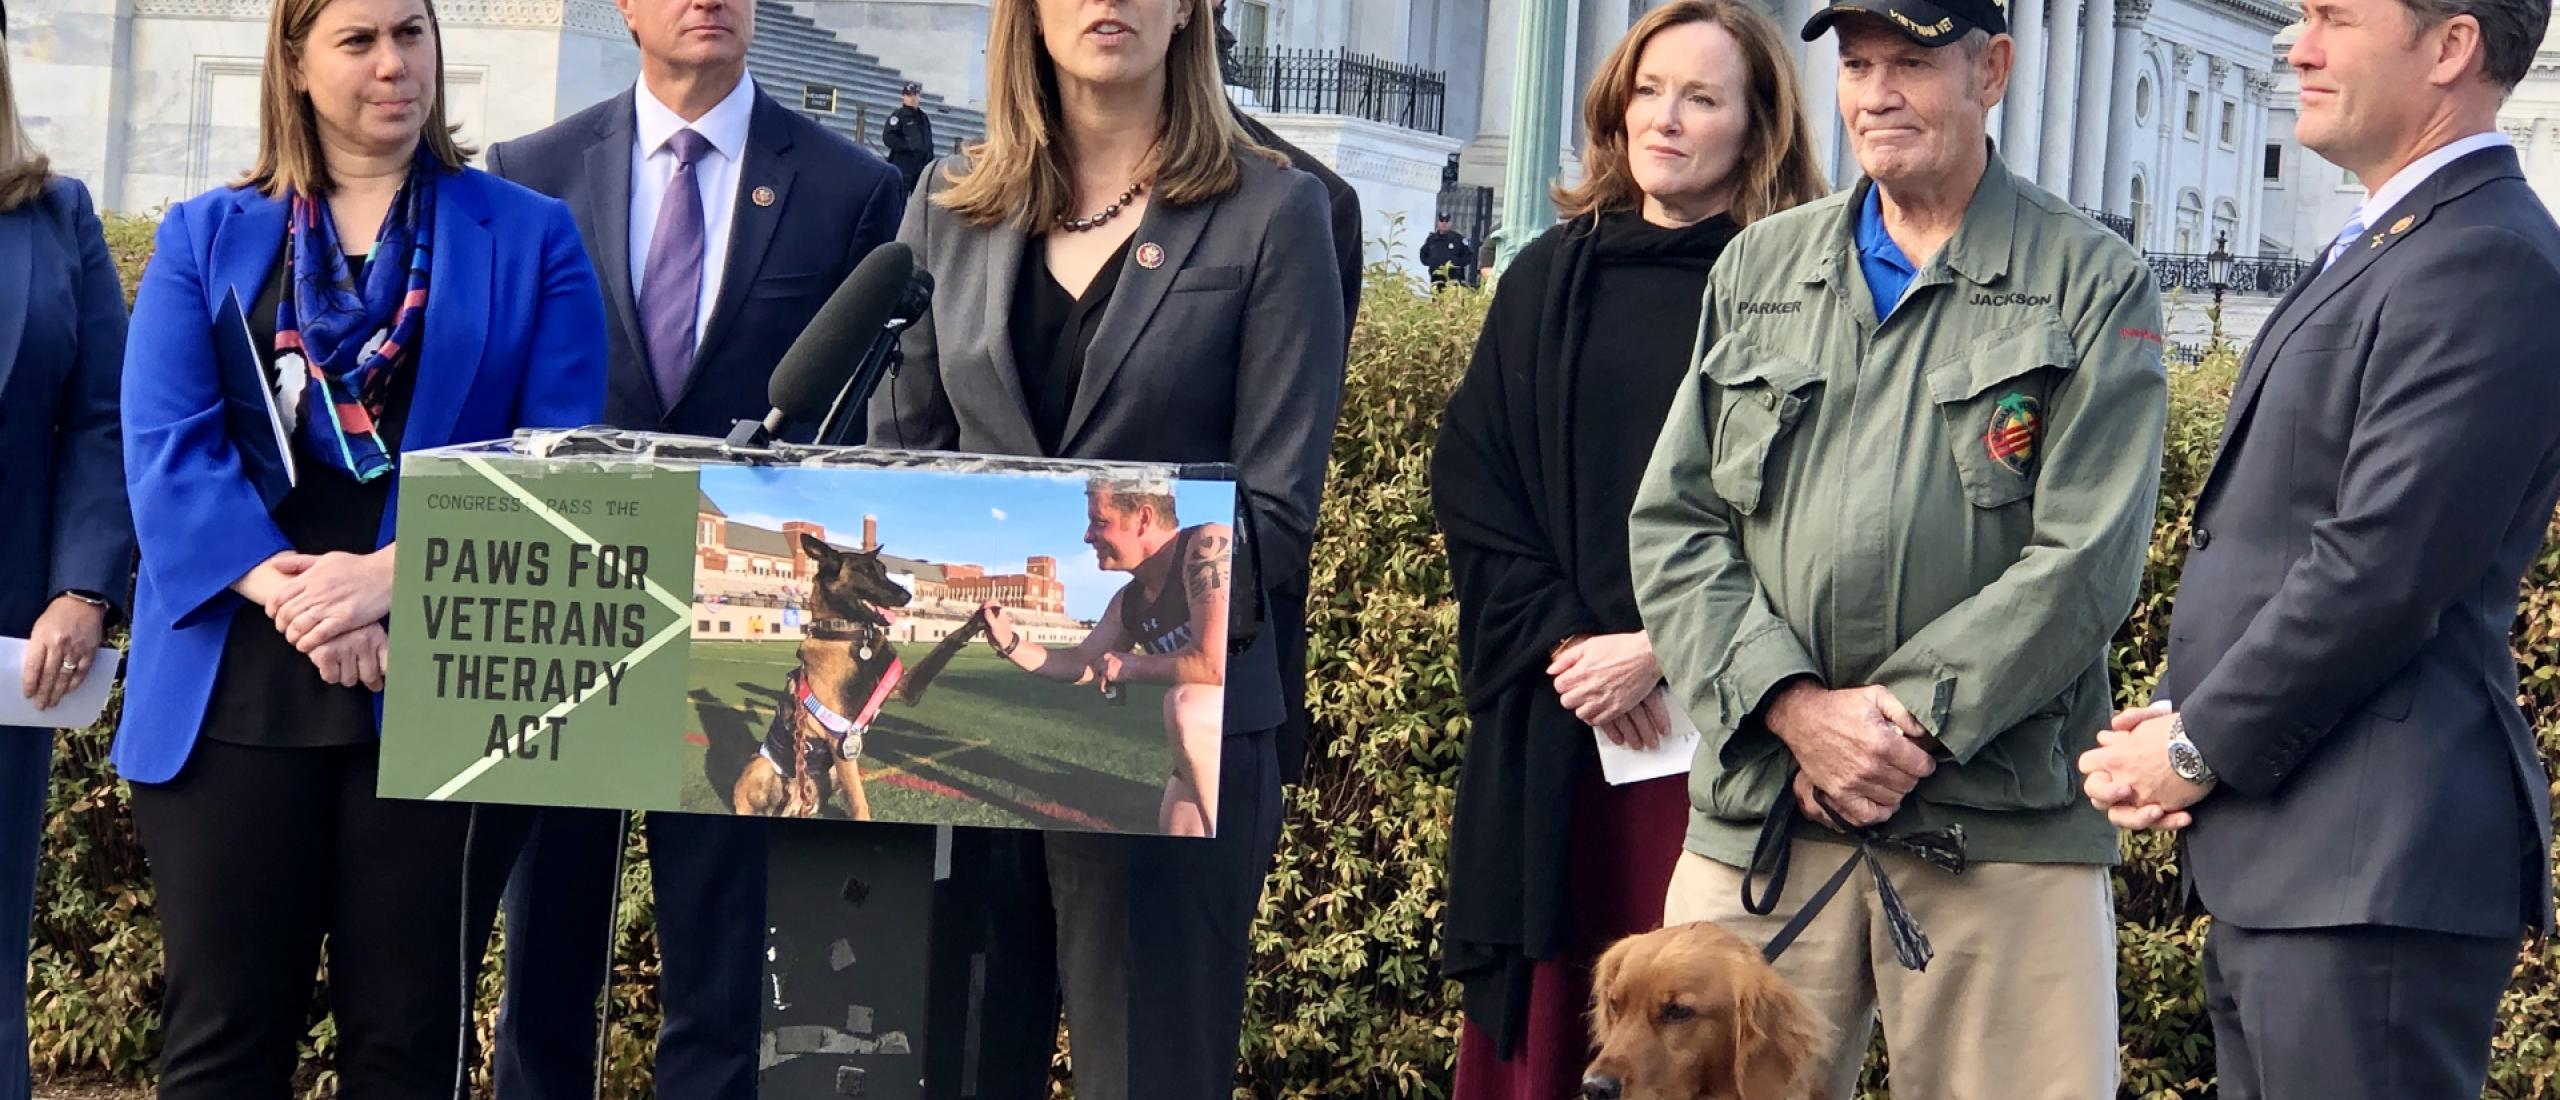 Rep. Sherrill Delivers Unanimous Passage of Bipartisan Bill to Pair Veterans with Service Dogs